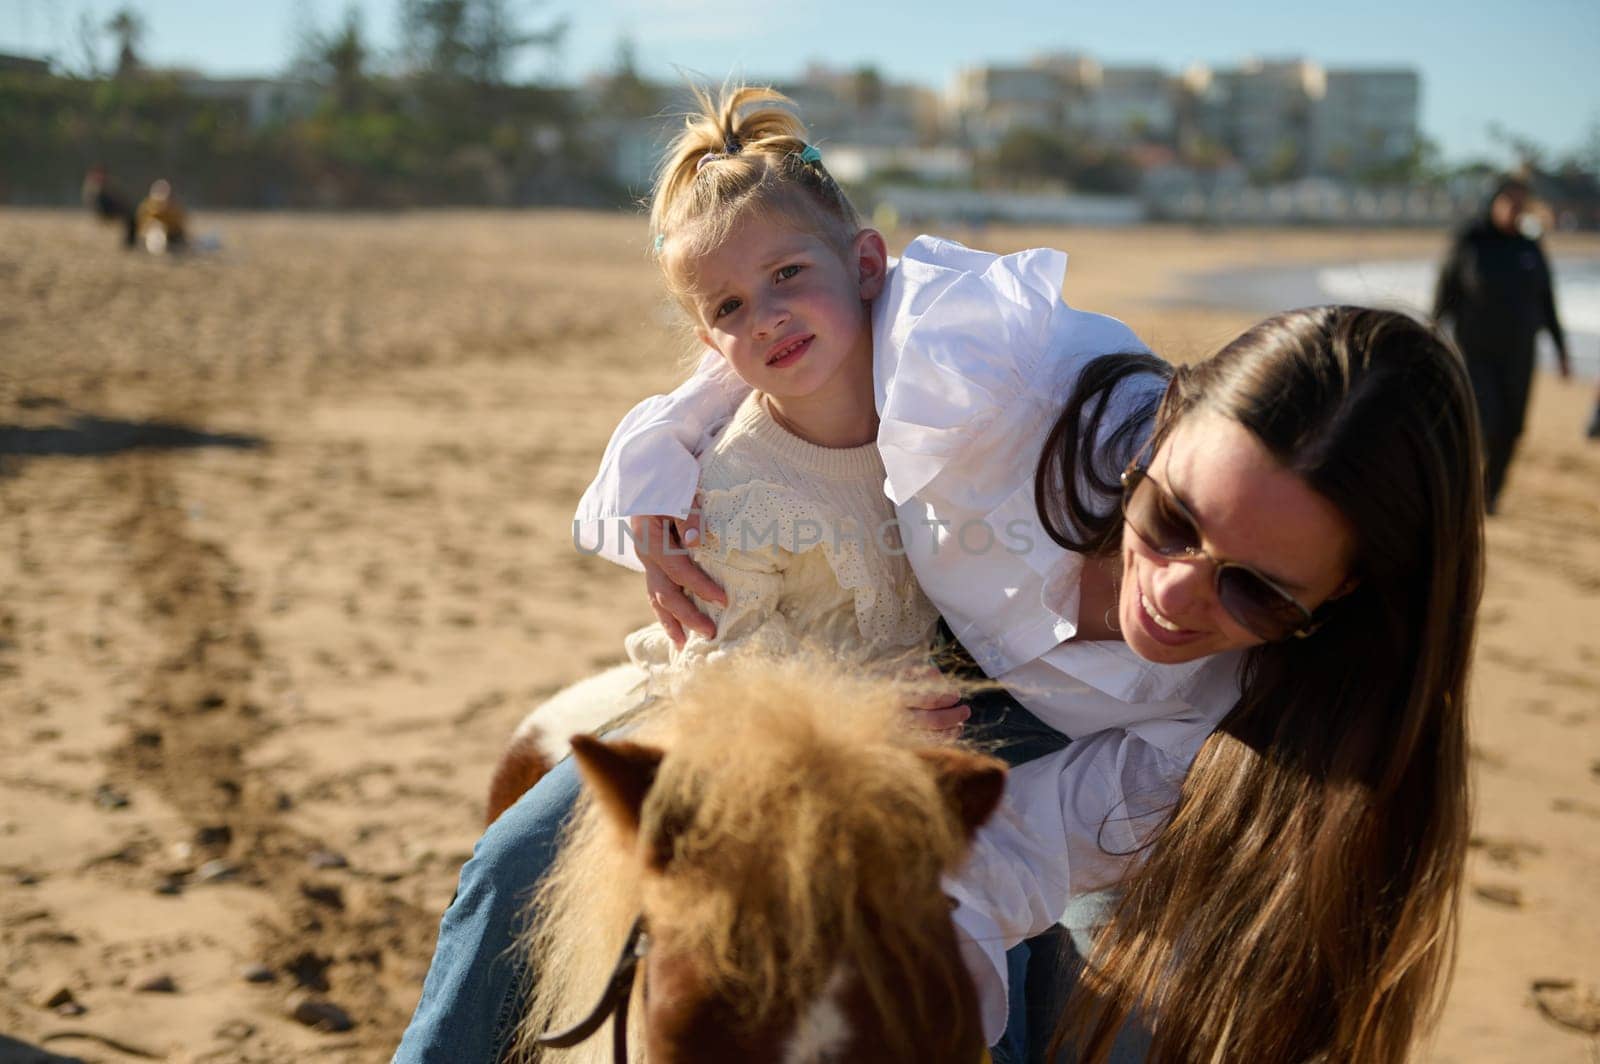 Smiling mother stroking a little pony while supports her daughter on learning horse riding on the sandy beach. People. Active healthy lifestyle. Hobbies and leisure